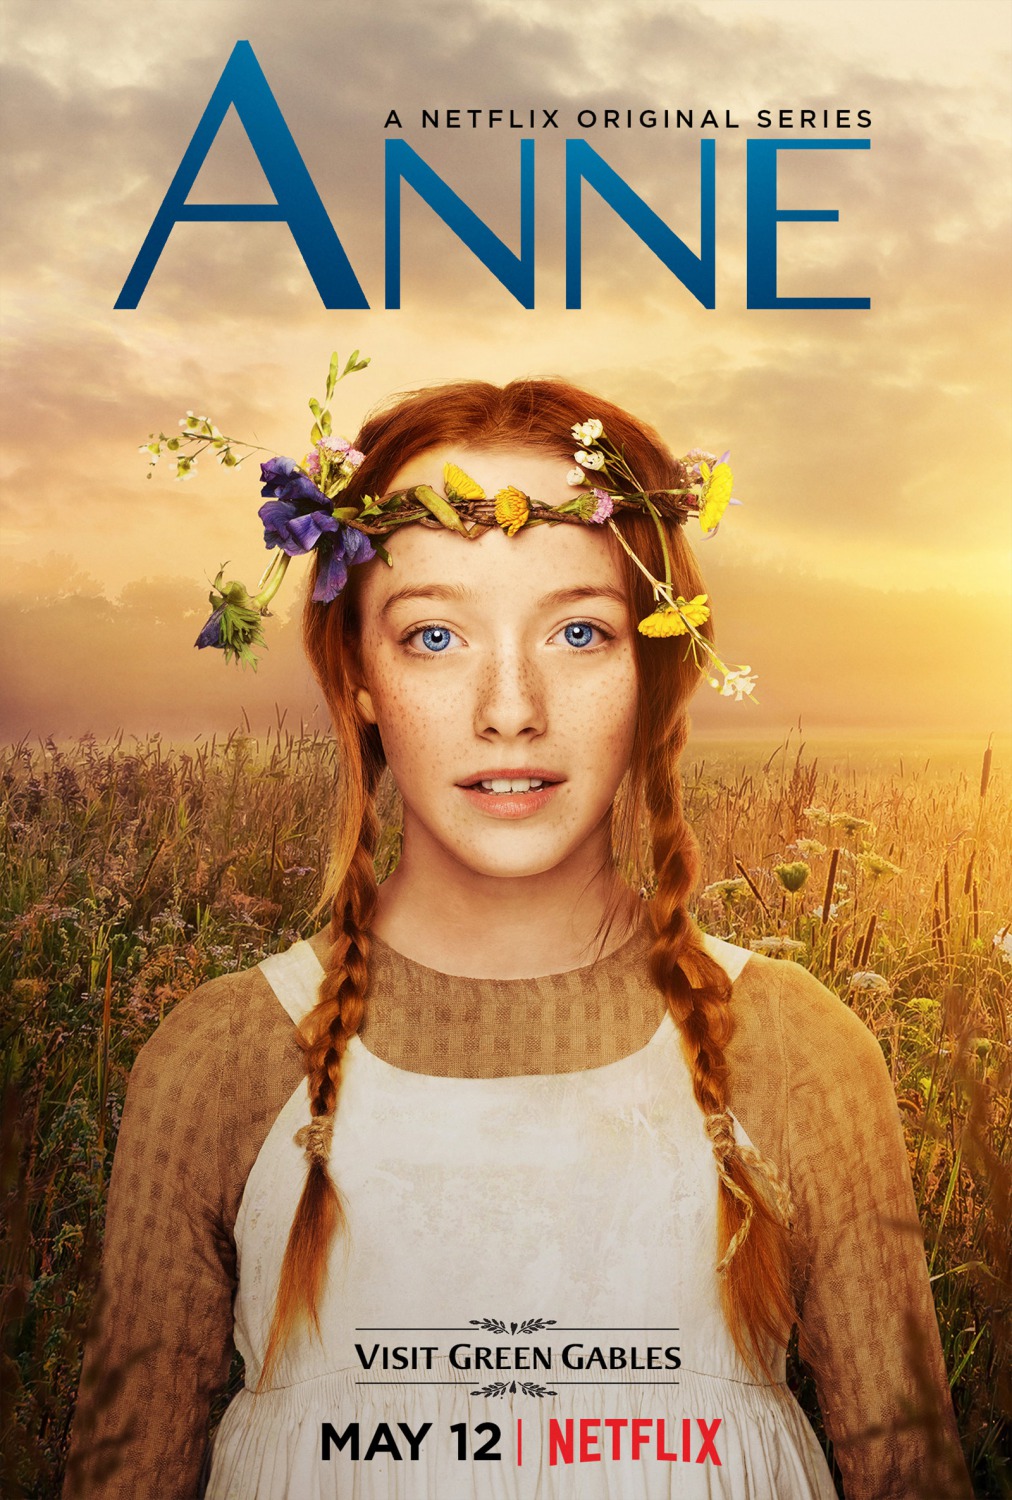 Extra Large TV Poster Image for Anne (#1 of 3)